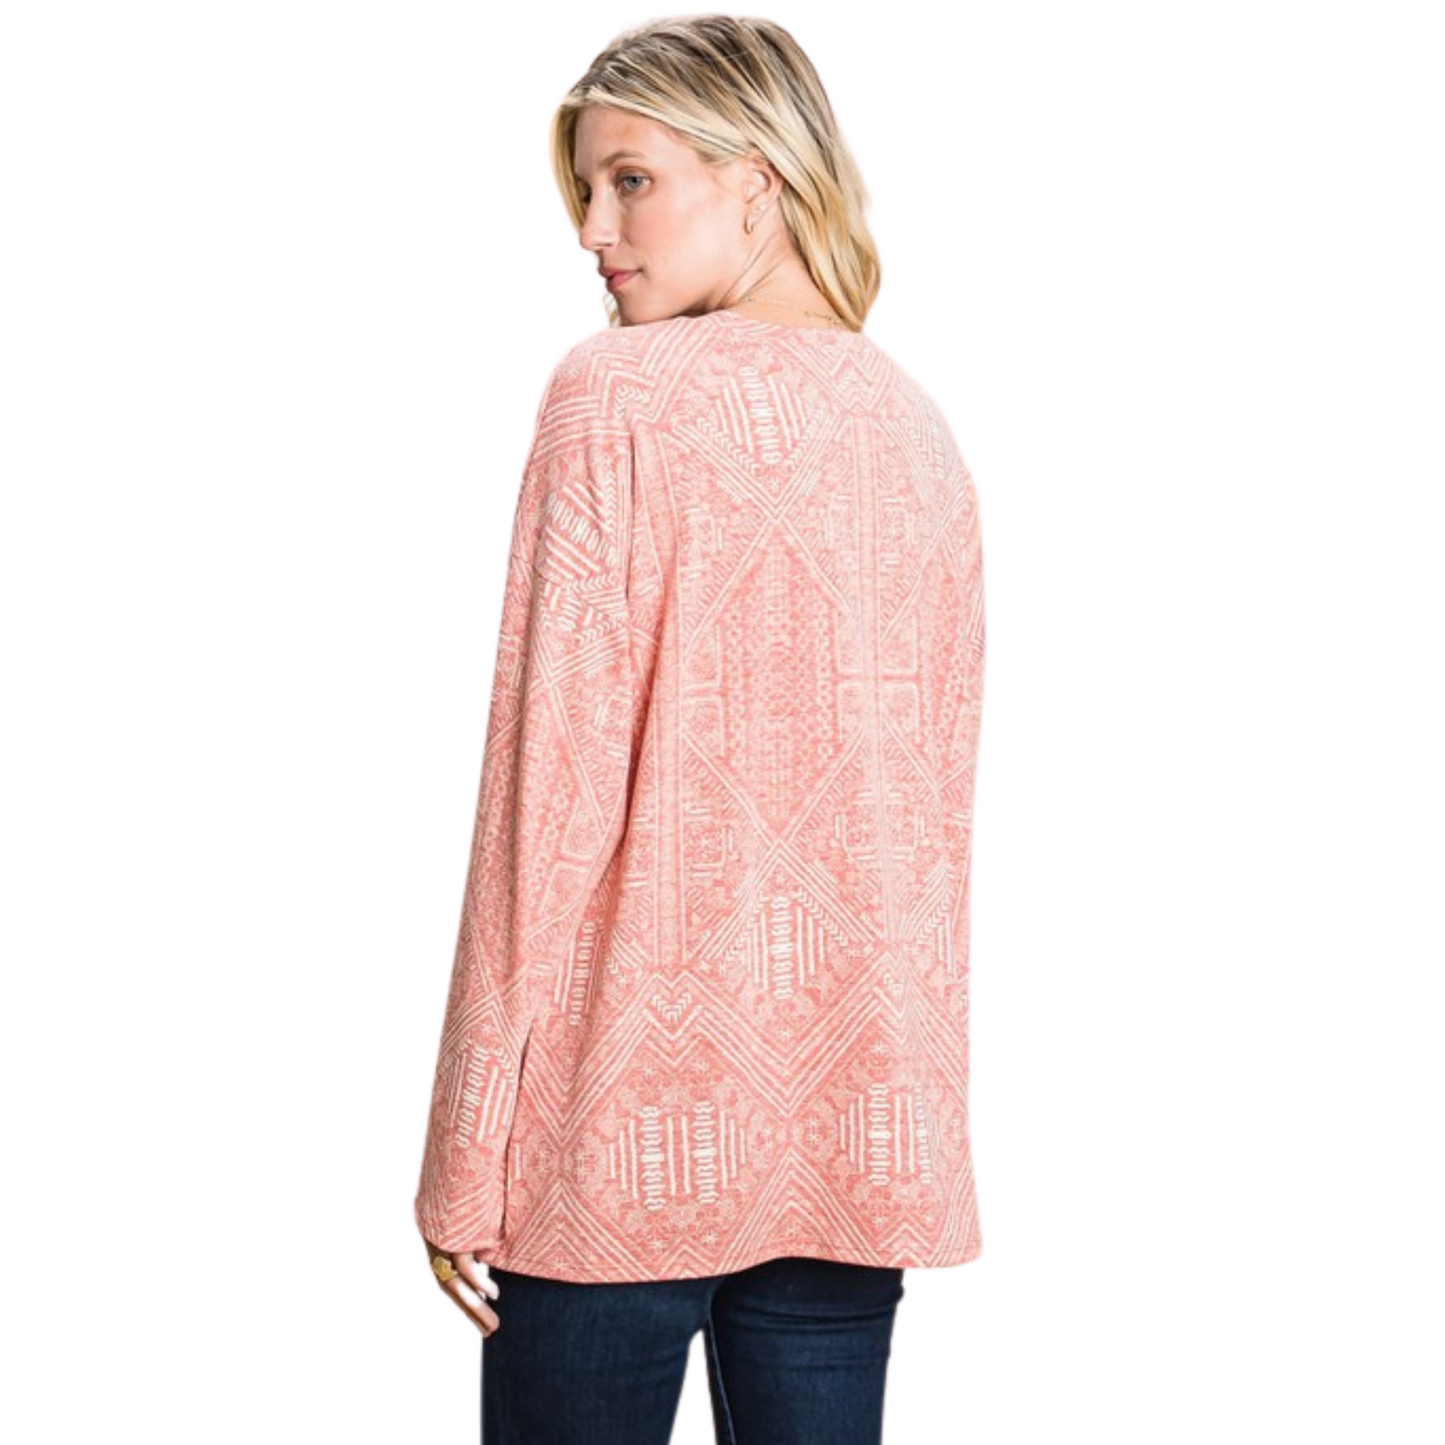 Stay comfortable and stylish with this Printed Round Neck Long Sleeve Top. This plus size top is designed with a loose fit, a long sleeve construction, and a stunning pink color. Ideal for any casual occasion, this top offers a comfortable fit and a great look.